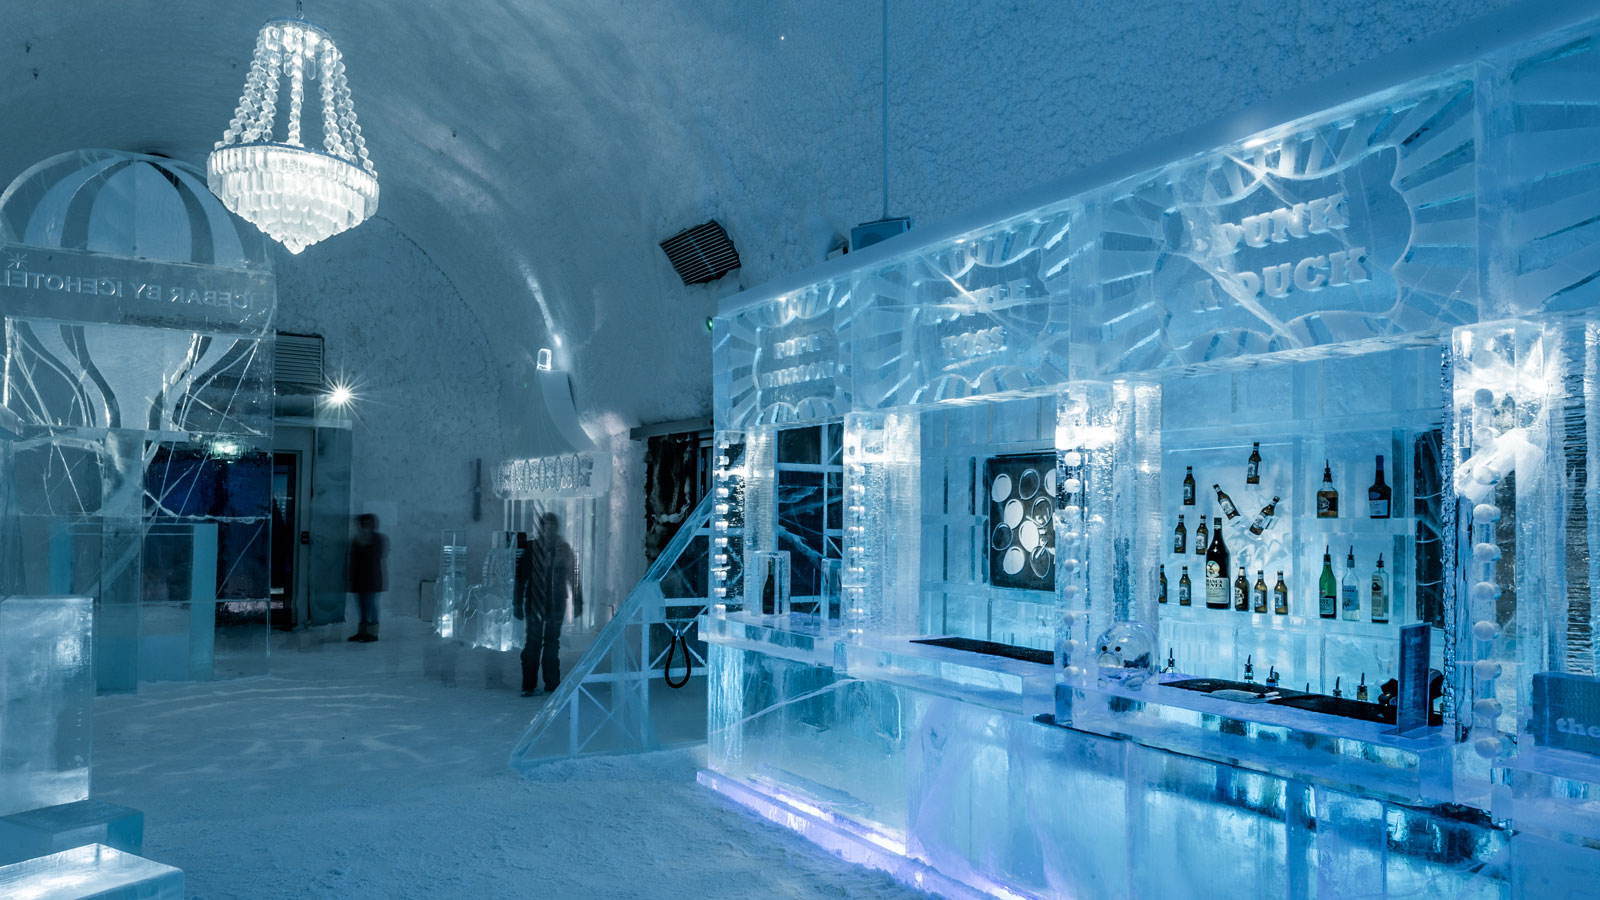 Sweden's ICEHOTEL celebrates its 30th anniversary | CNN Travel